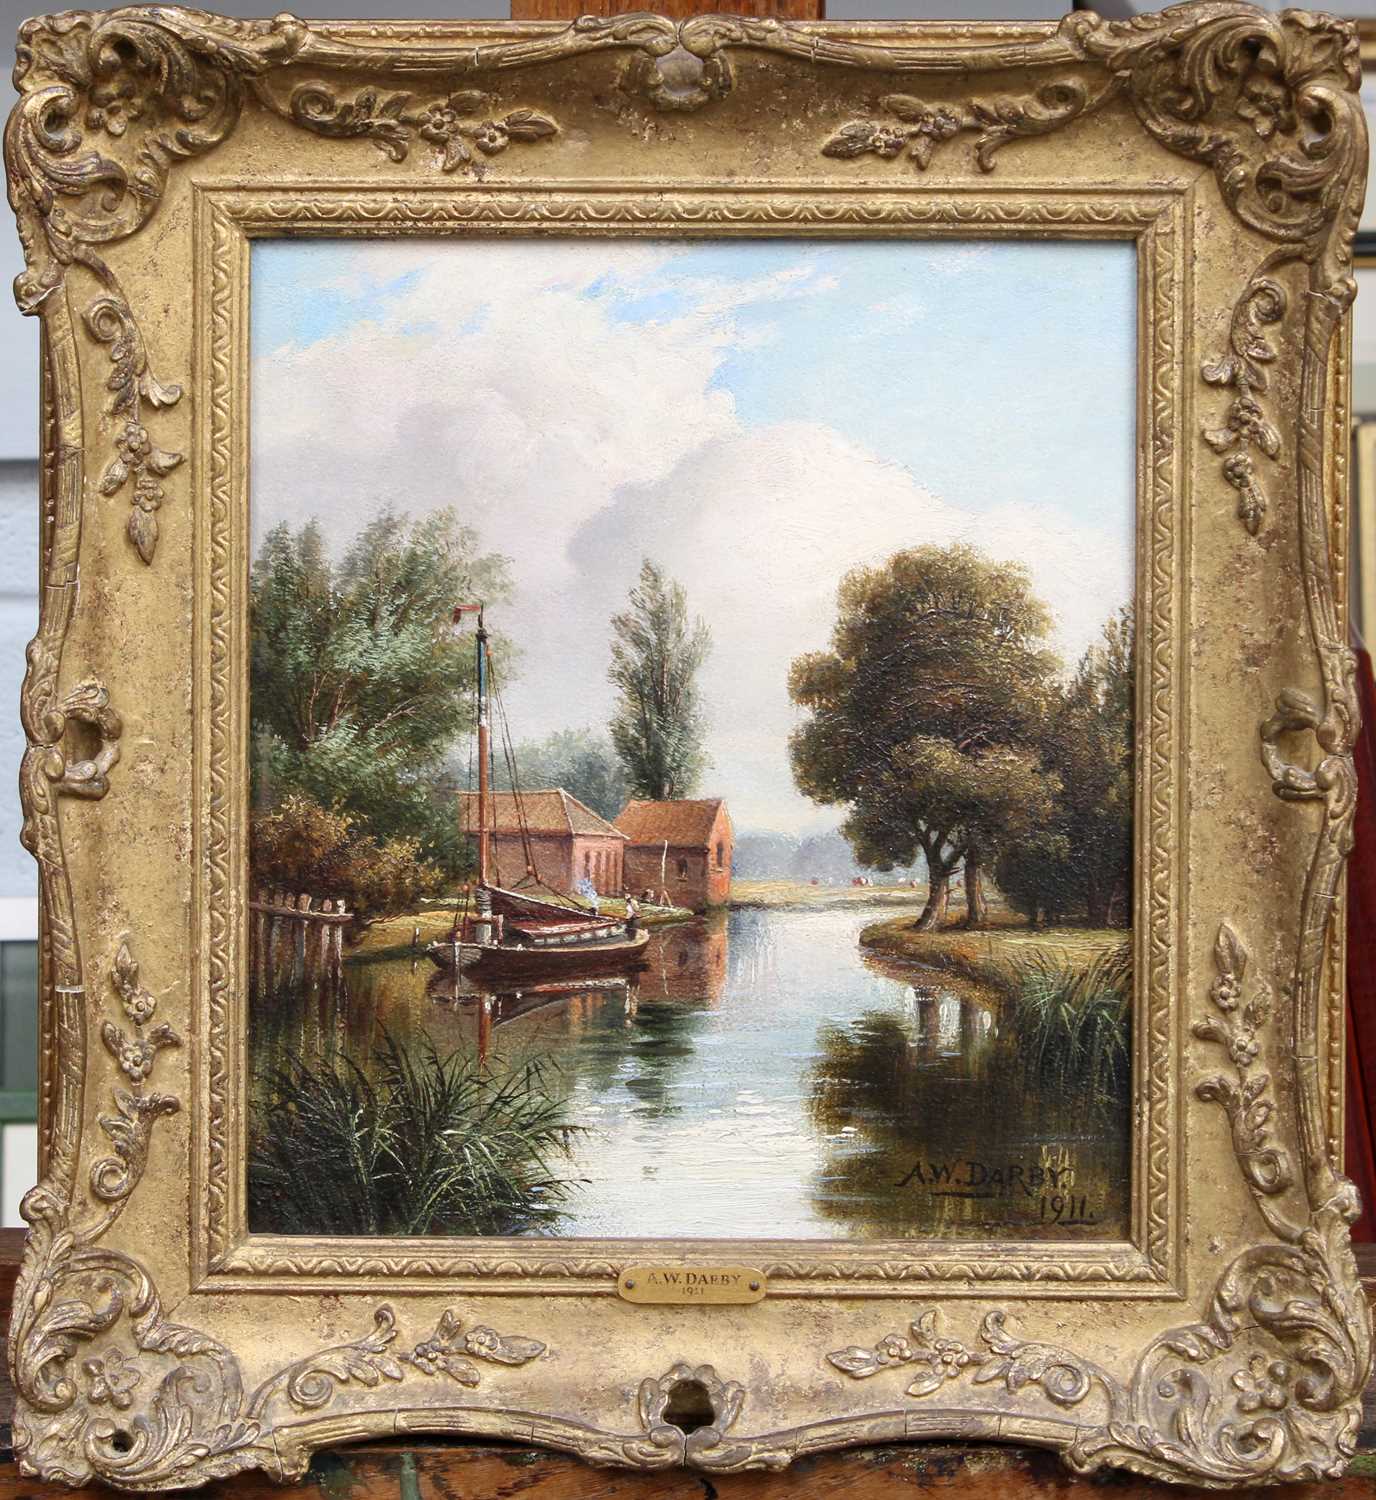 Alfred William Darby (1844-1916) "A river scene at Coltishall near Norwich" Signed and dated 1911, - Image 2 of 2